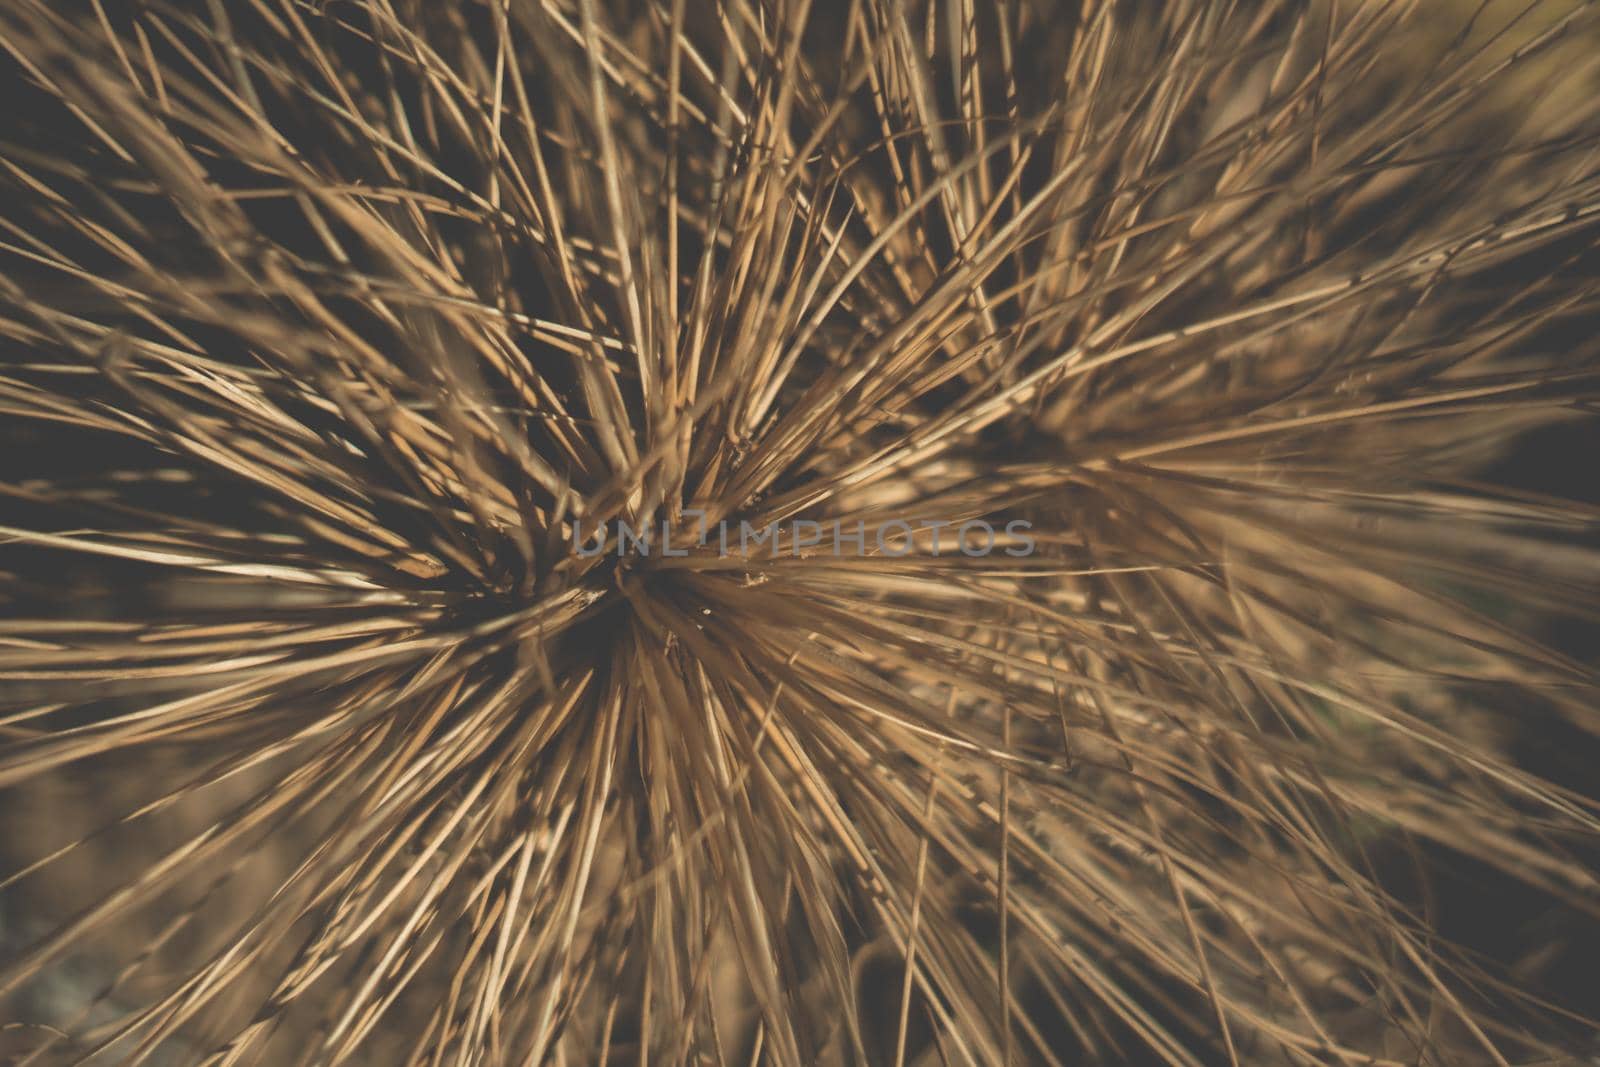 Abstract real photo nature beauty background. Macro dry tropical long needles thorns branch plant grass looks like firework. Decor element ideas. Pale brown light vintage tone. More color in stock.